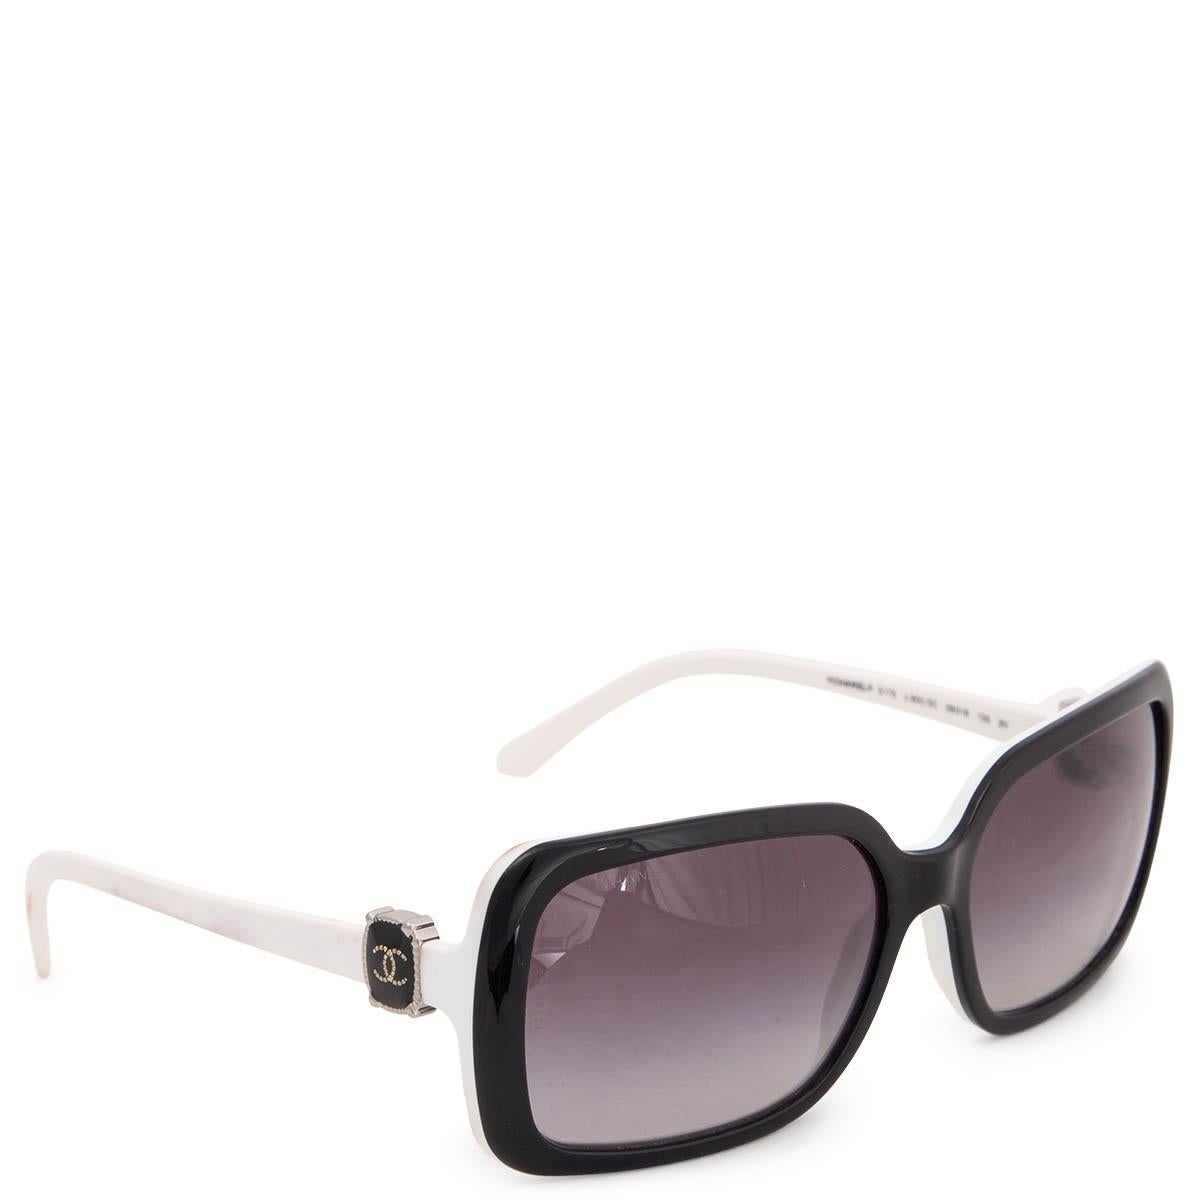 100% authentic Chanel 5175 c.900/3c sunglasses with grey gradient lenses and a black and white acetate frame. CC logo detailing on the side. Have been worn and show some dark spots on the white frame and temples. Overall in very good conditoon. Come